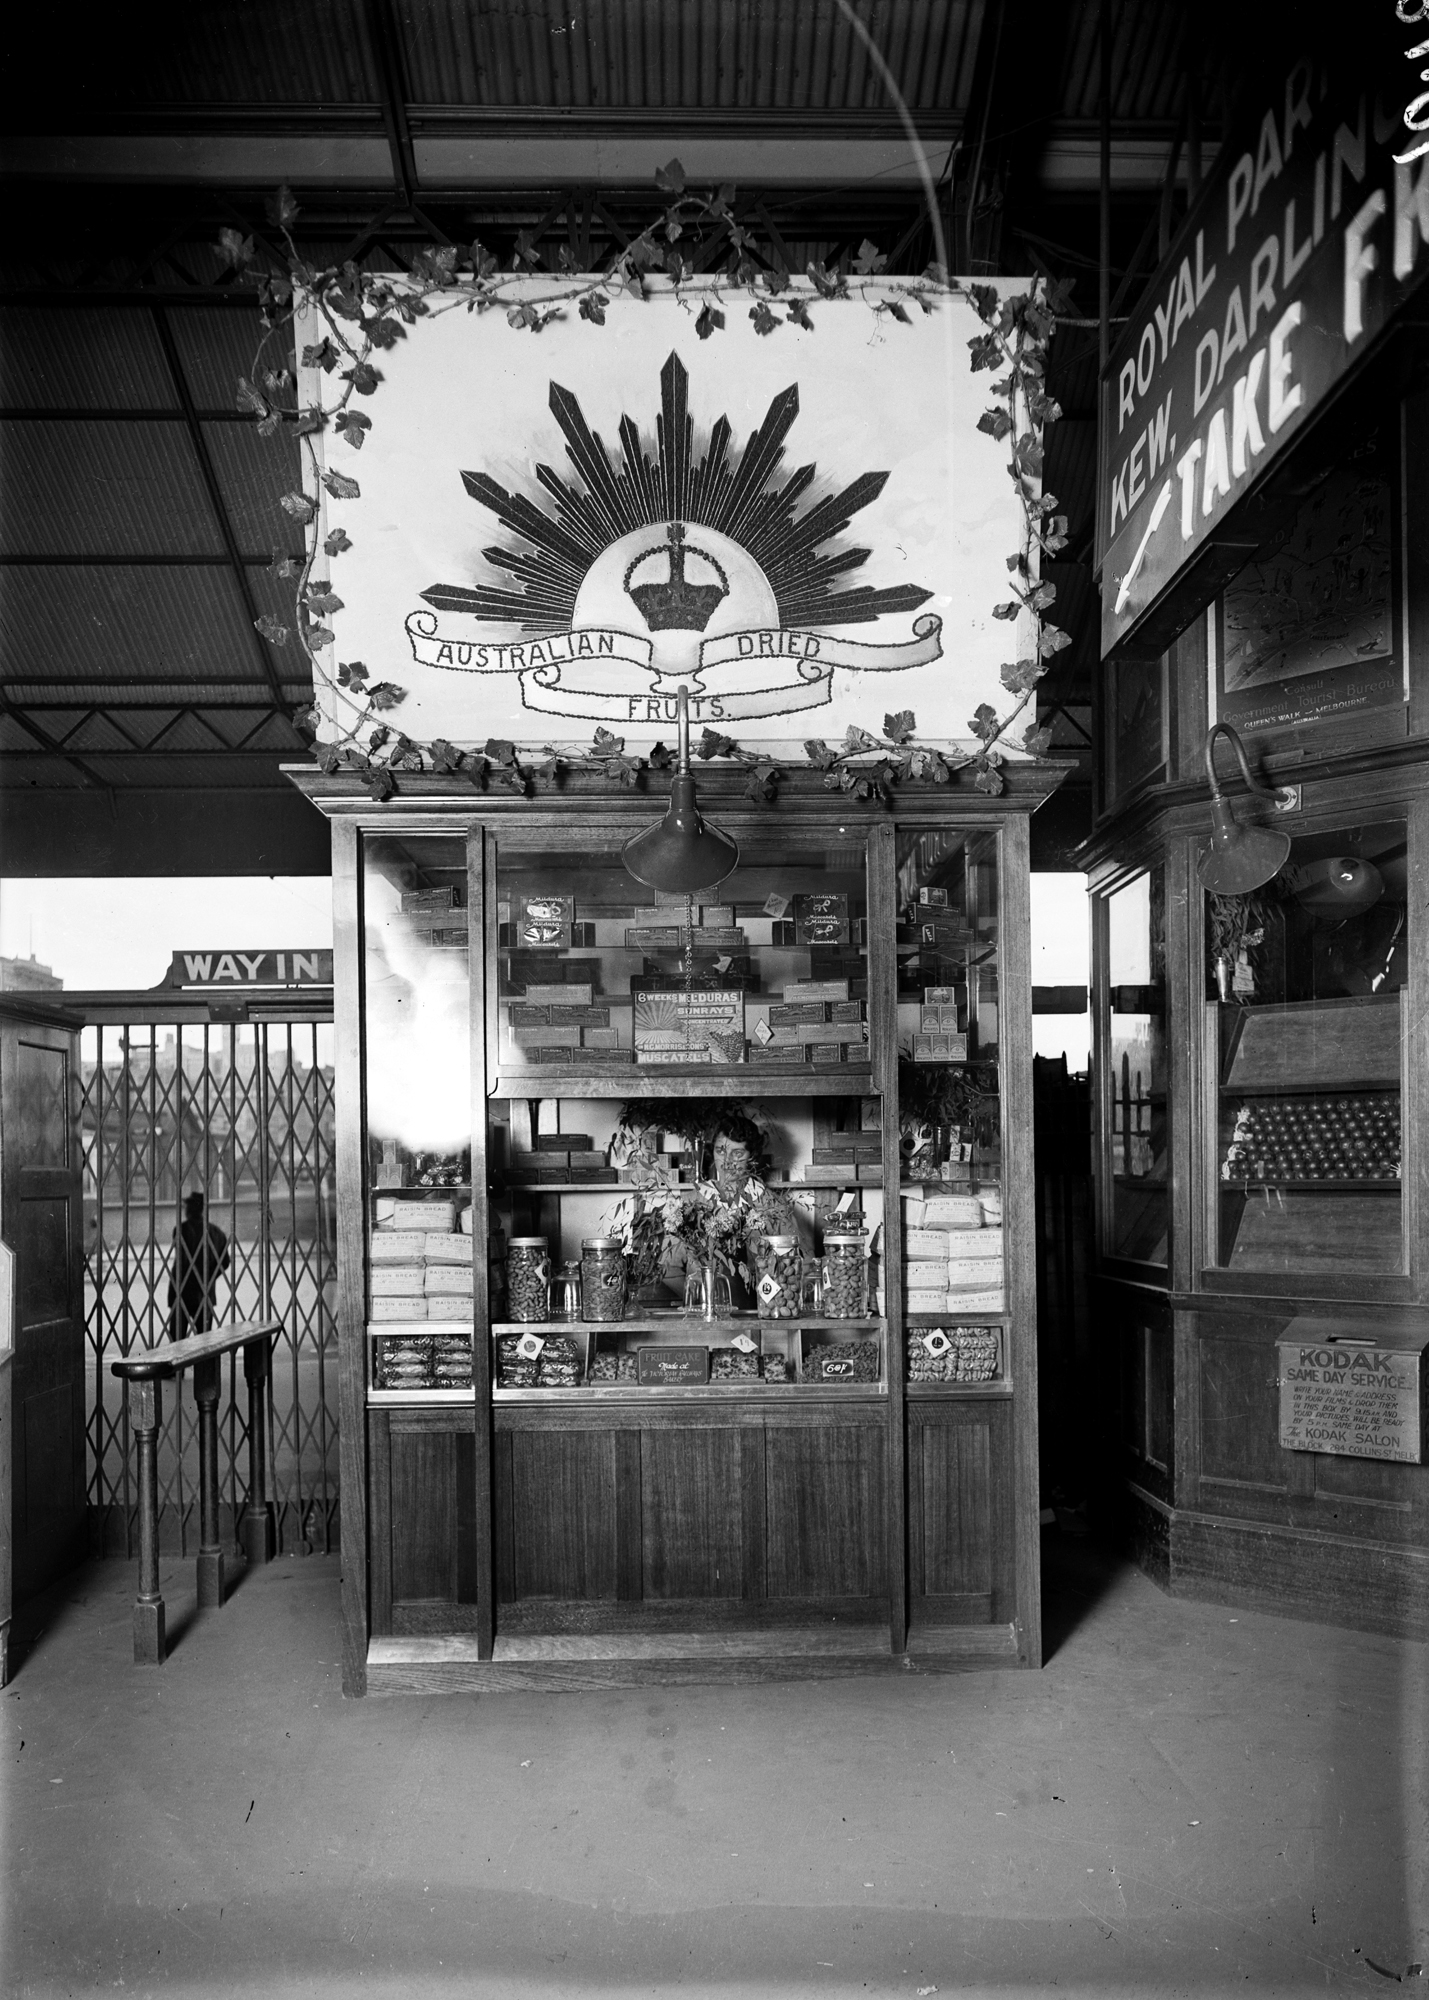 Dried fruit stall at Flinders Street Station, circa 1920s